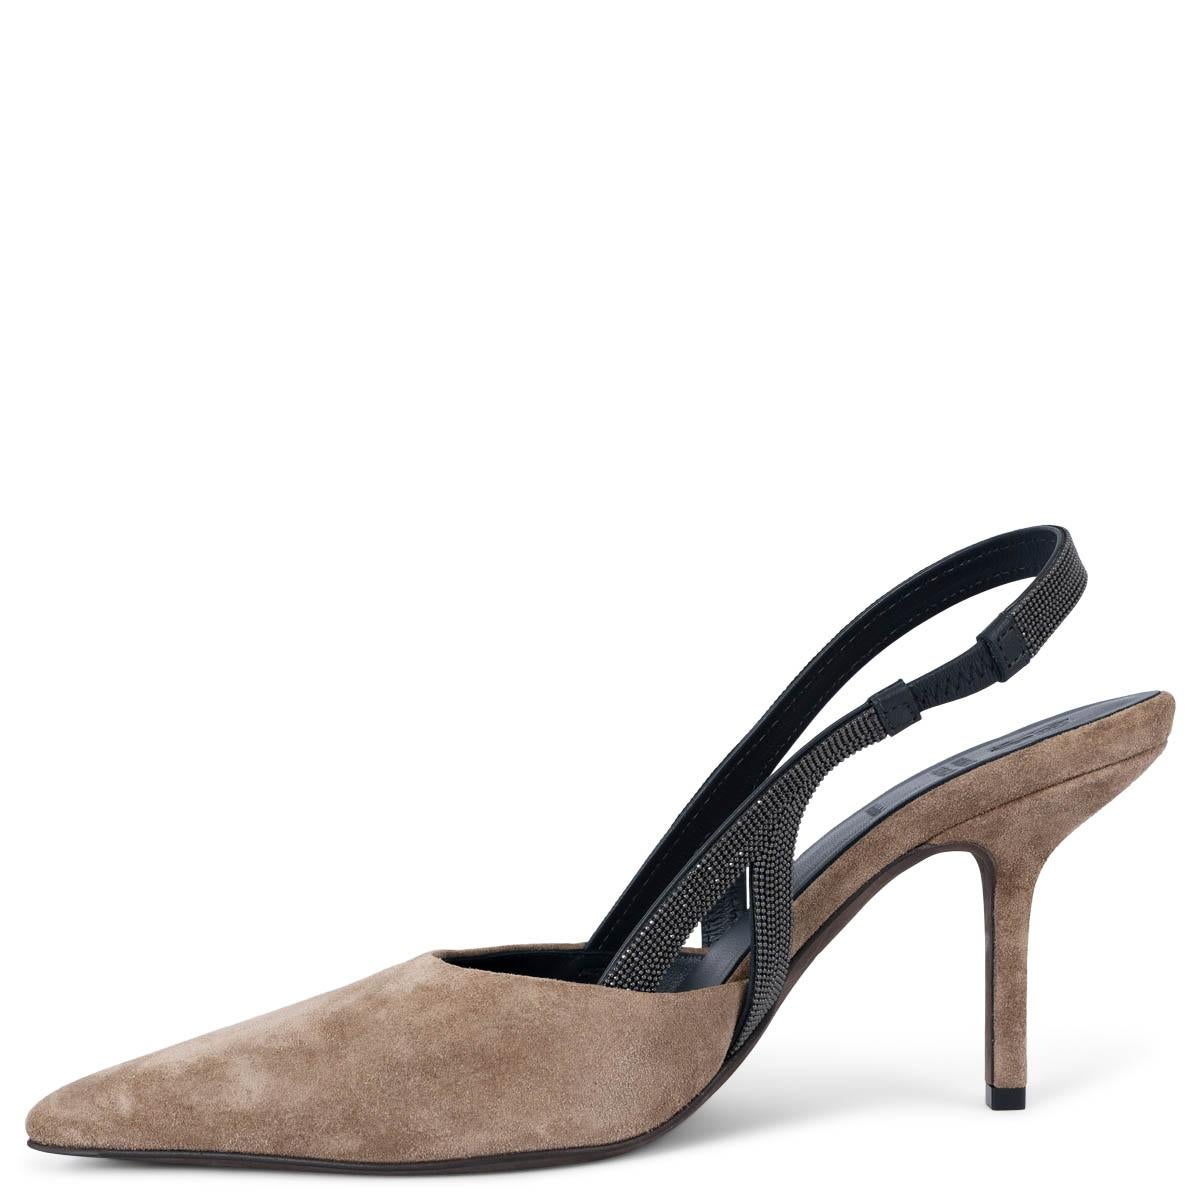 BRUNELLO CUCINELLI taupe suede MONILI Slingbacks Pumps Shoes 38 In New Condition For Sale In Zürich, CH